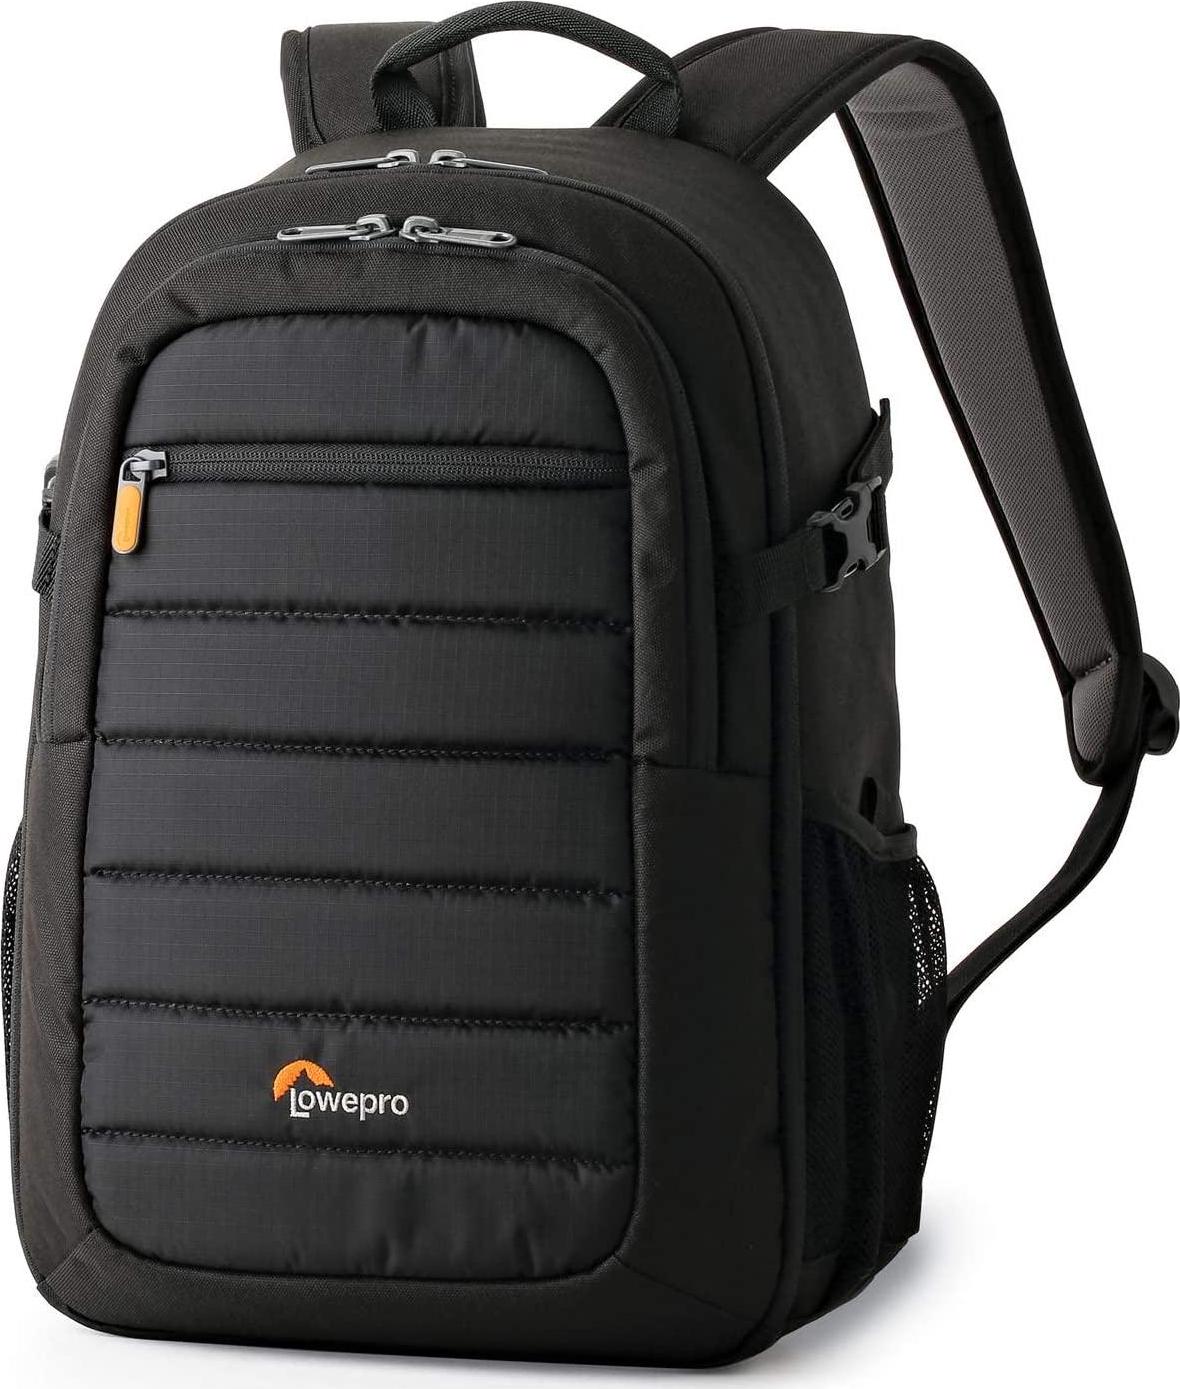 Lowepro, Lowepro Backpack Lightweight Sporty Lowepro Tahoe BP 150, Keep Your Photo Gear and Tablet Protected, Black (LP36892-PWW)